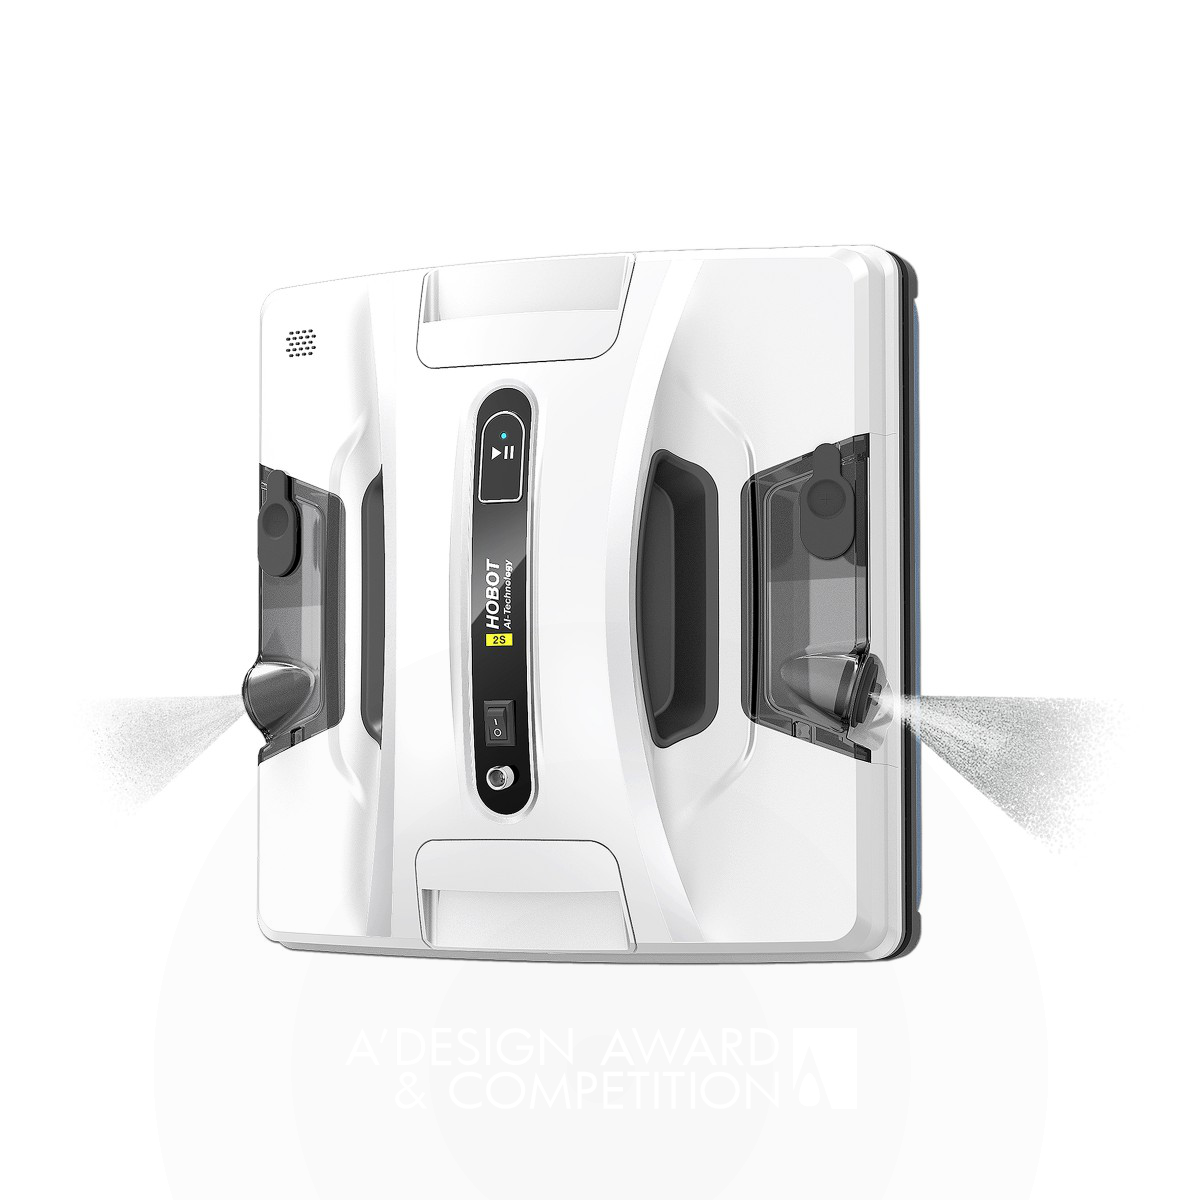 Hobot2S Window Cleaning Robot